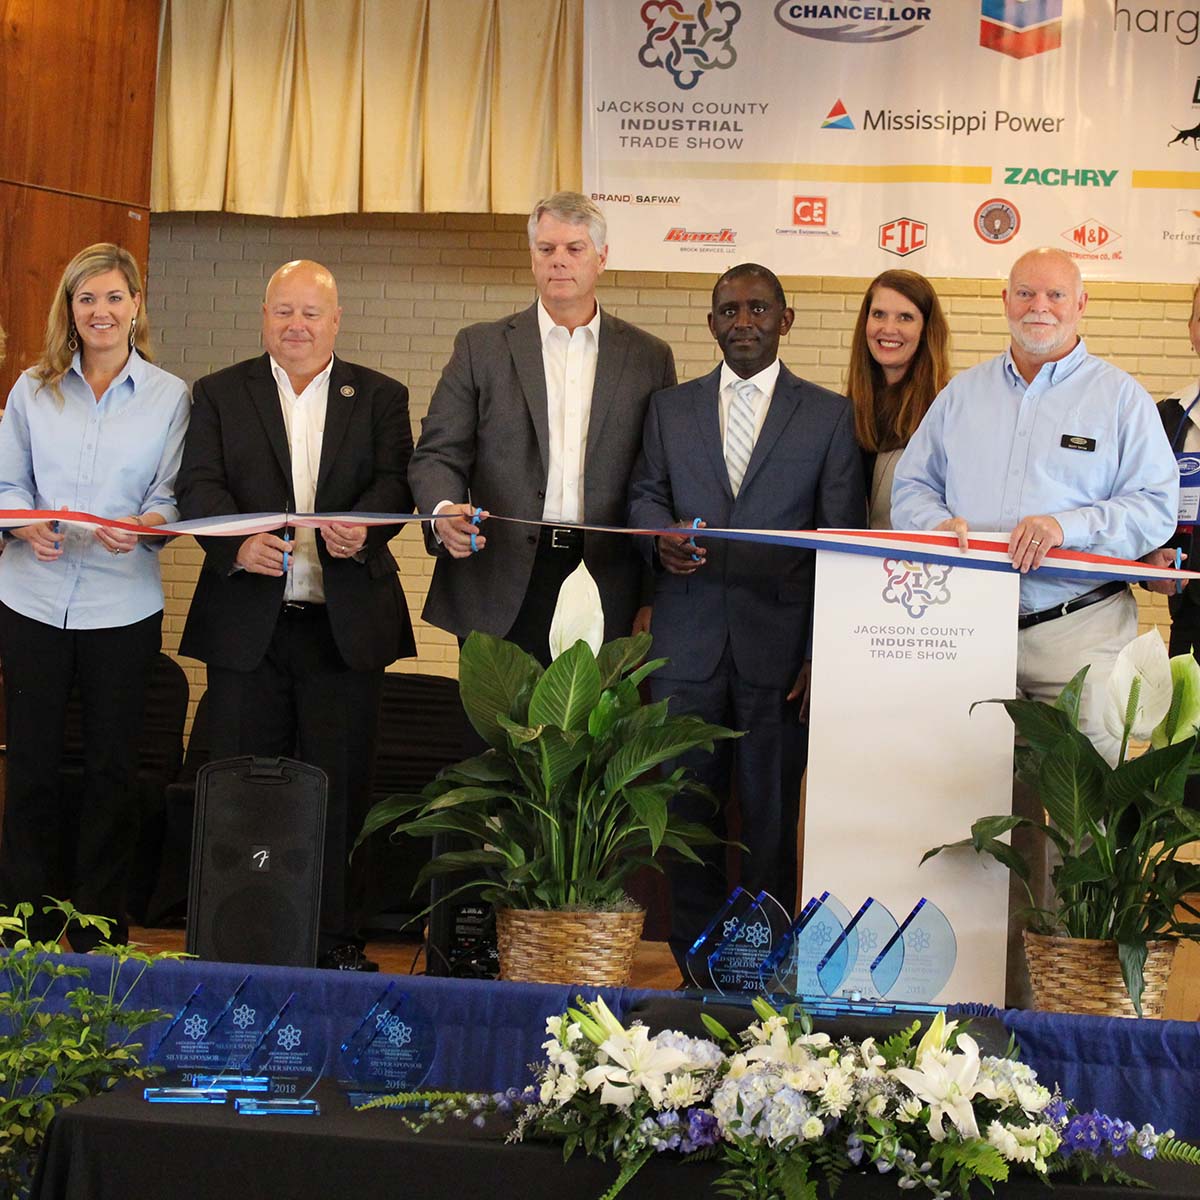 Jackson County Industrial Trade Show ribbon cutting